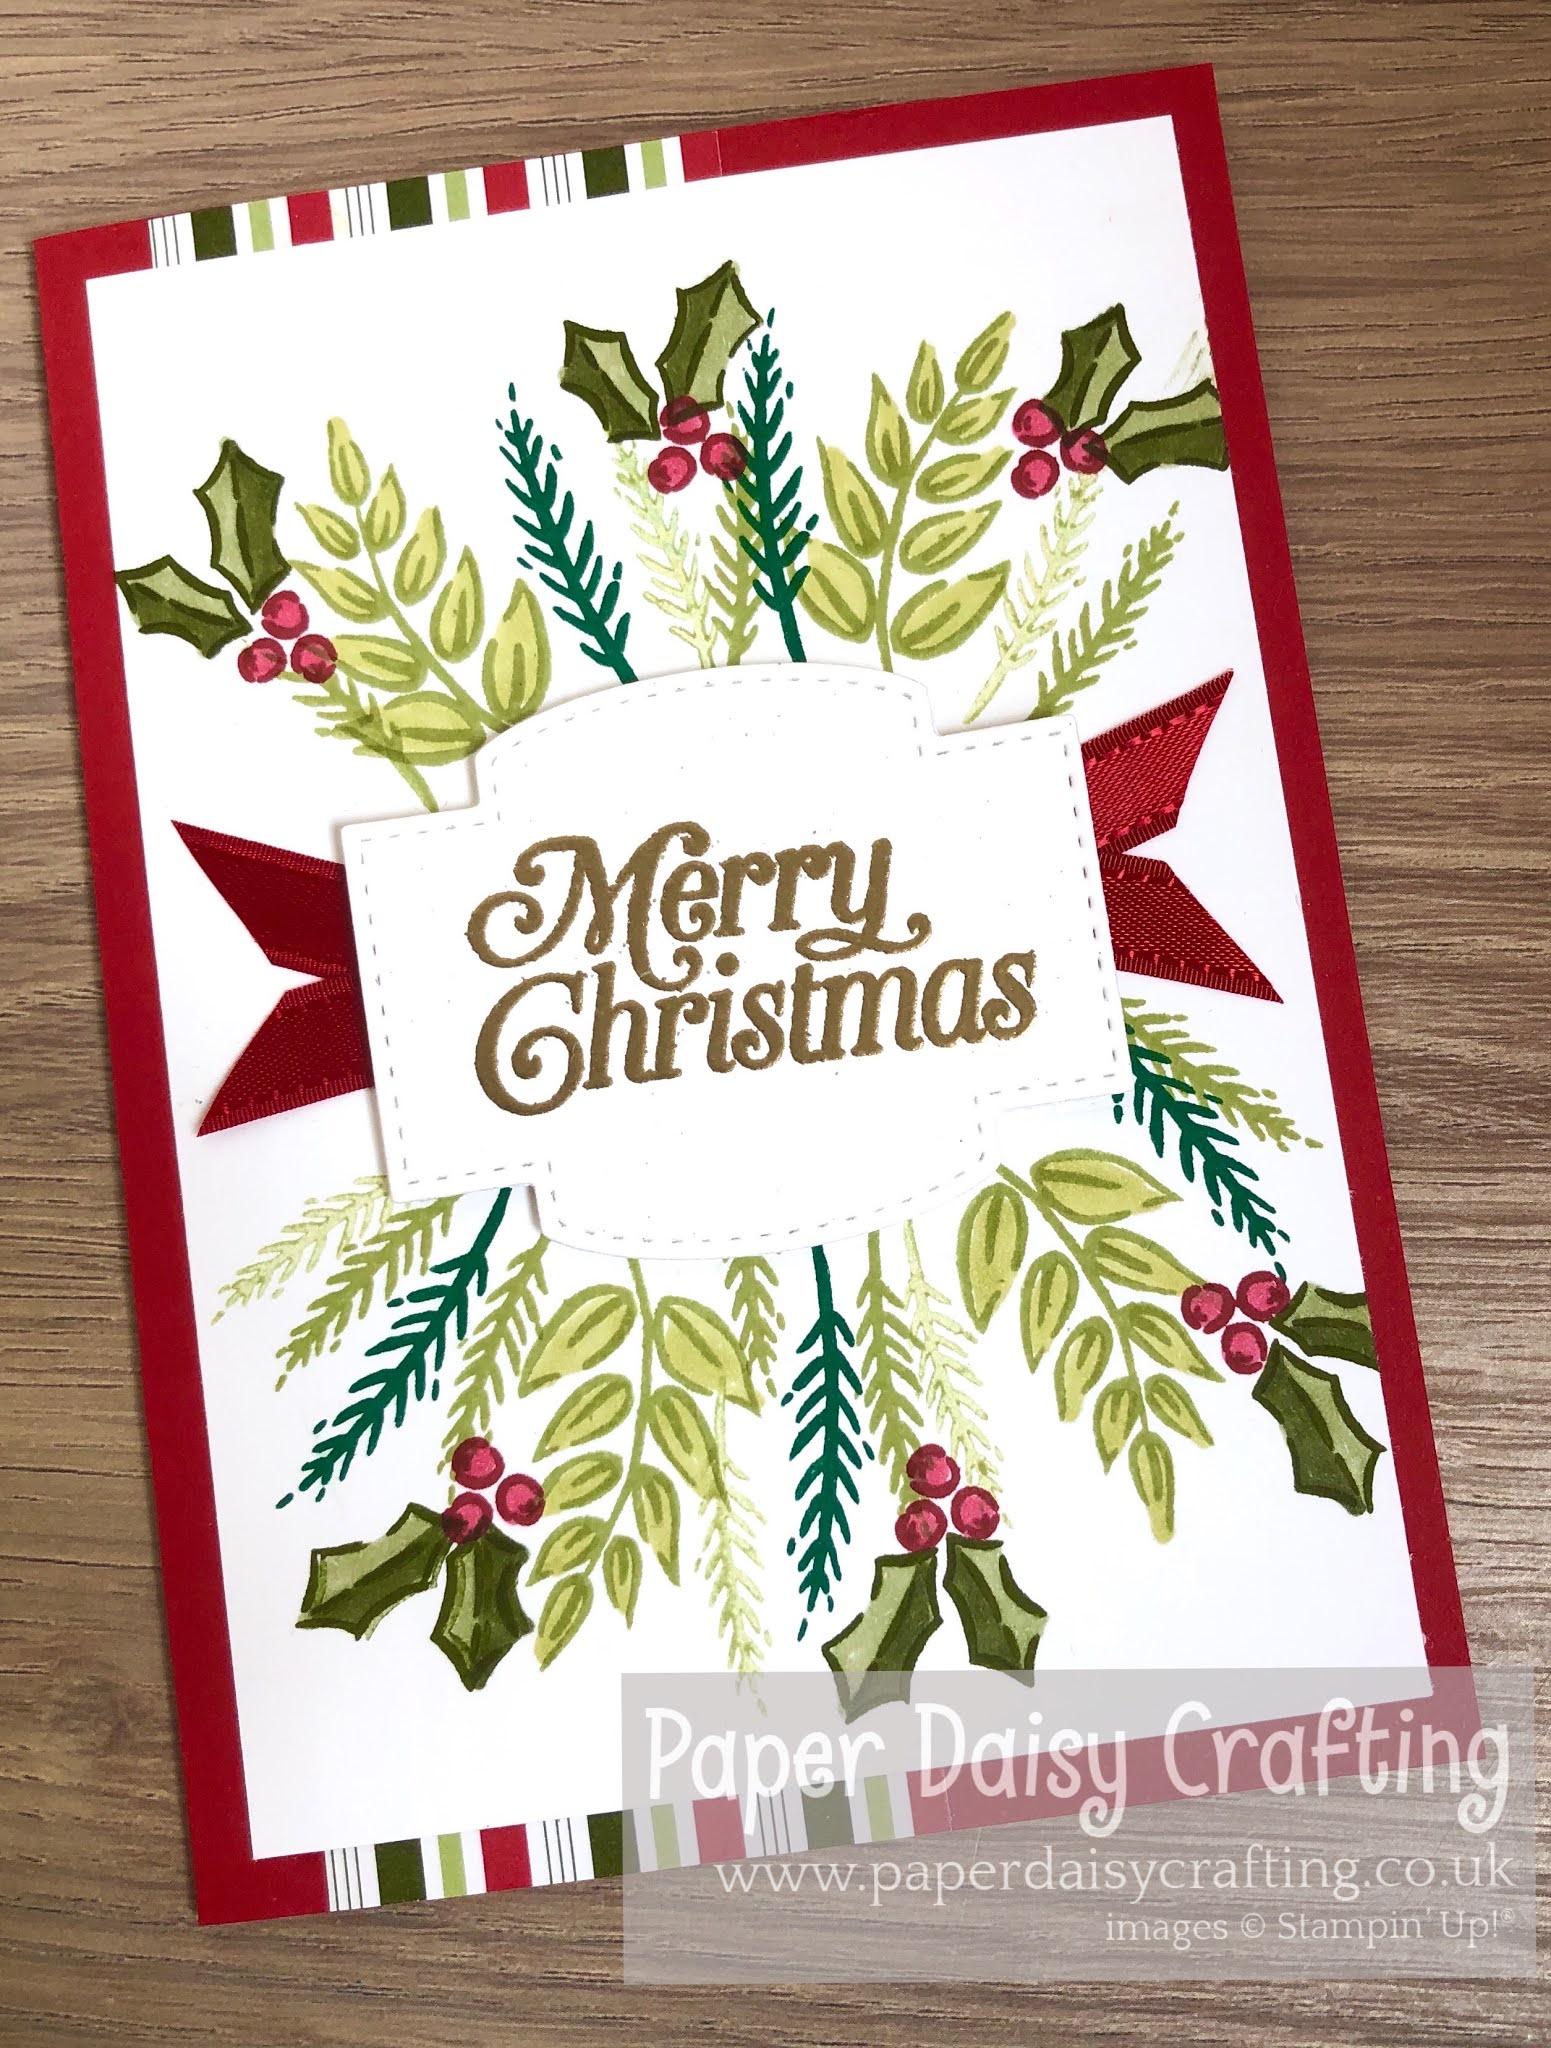 Paper Daisy Crafting Tag Buffet Christmas Card For Pootler Team Card Swap